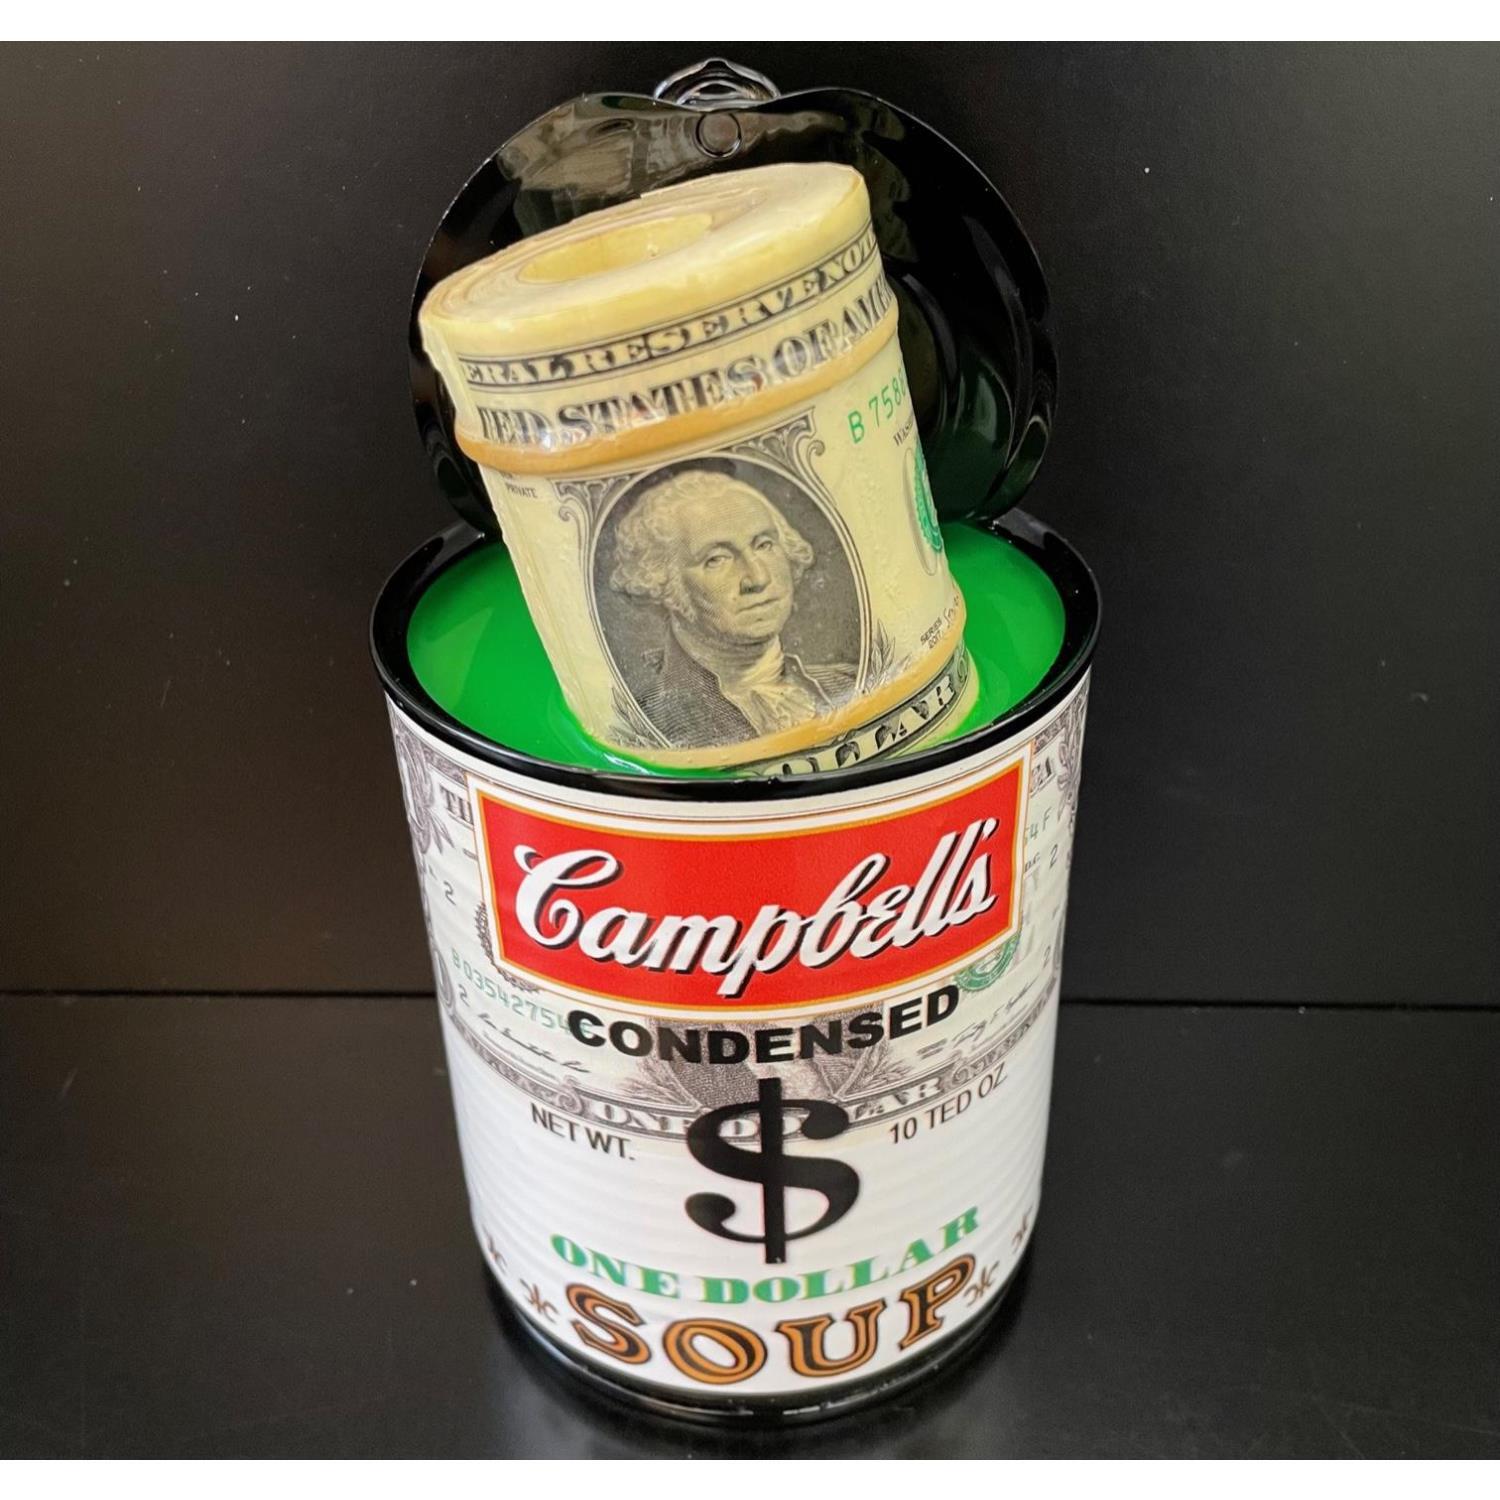 Contemporary Art - Mixed media - Campbell's Soup LV - Ted Pop Art